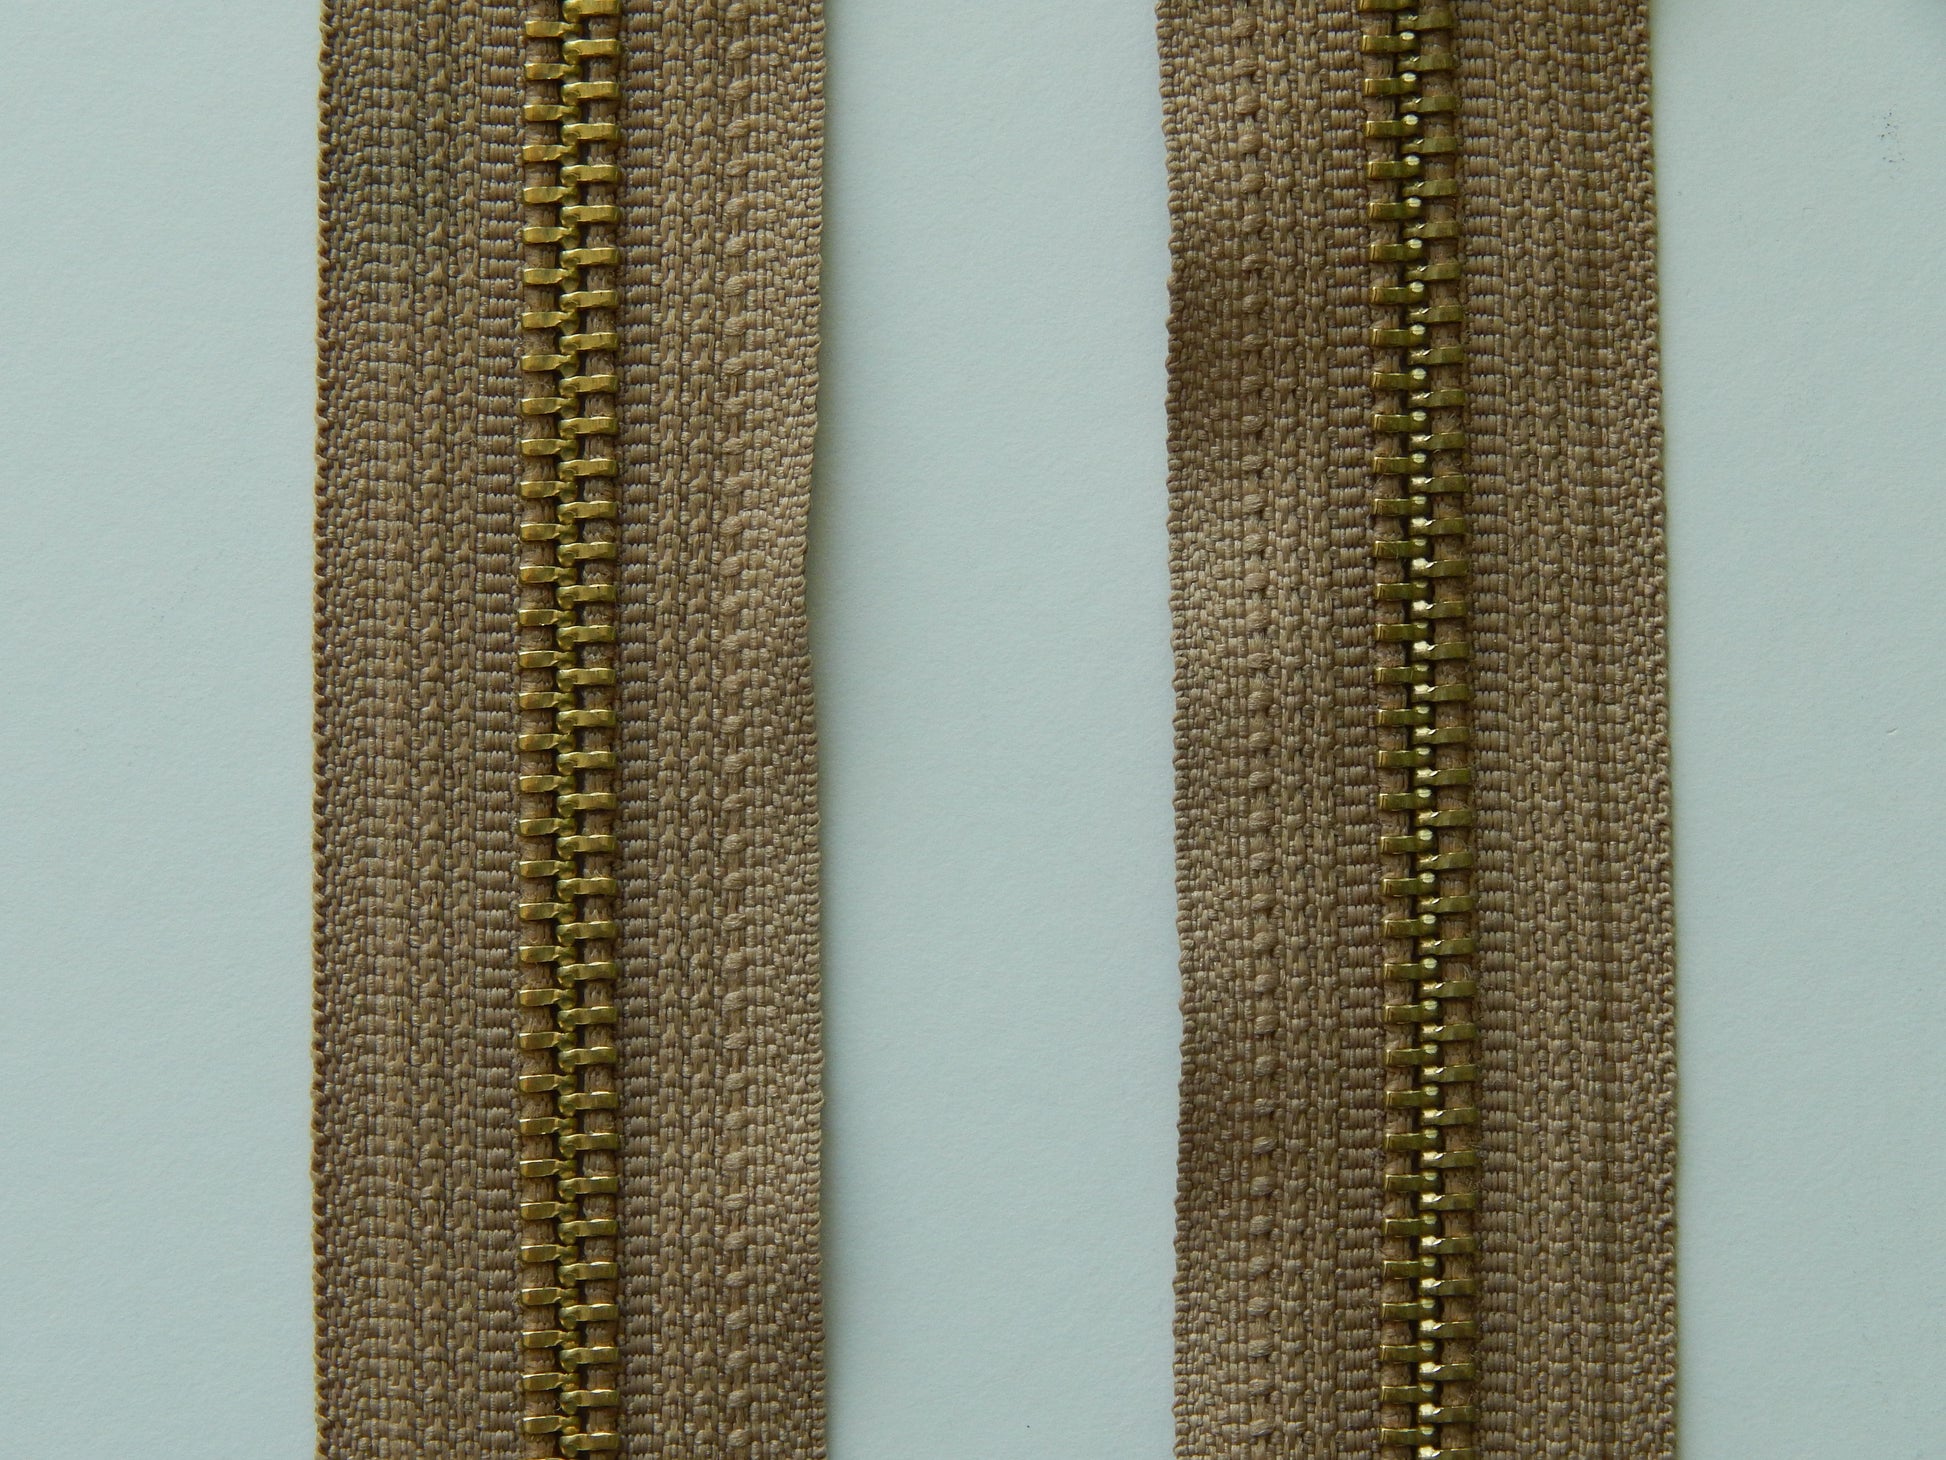 tan and gold zippers